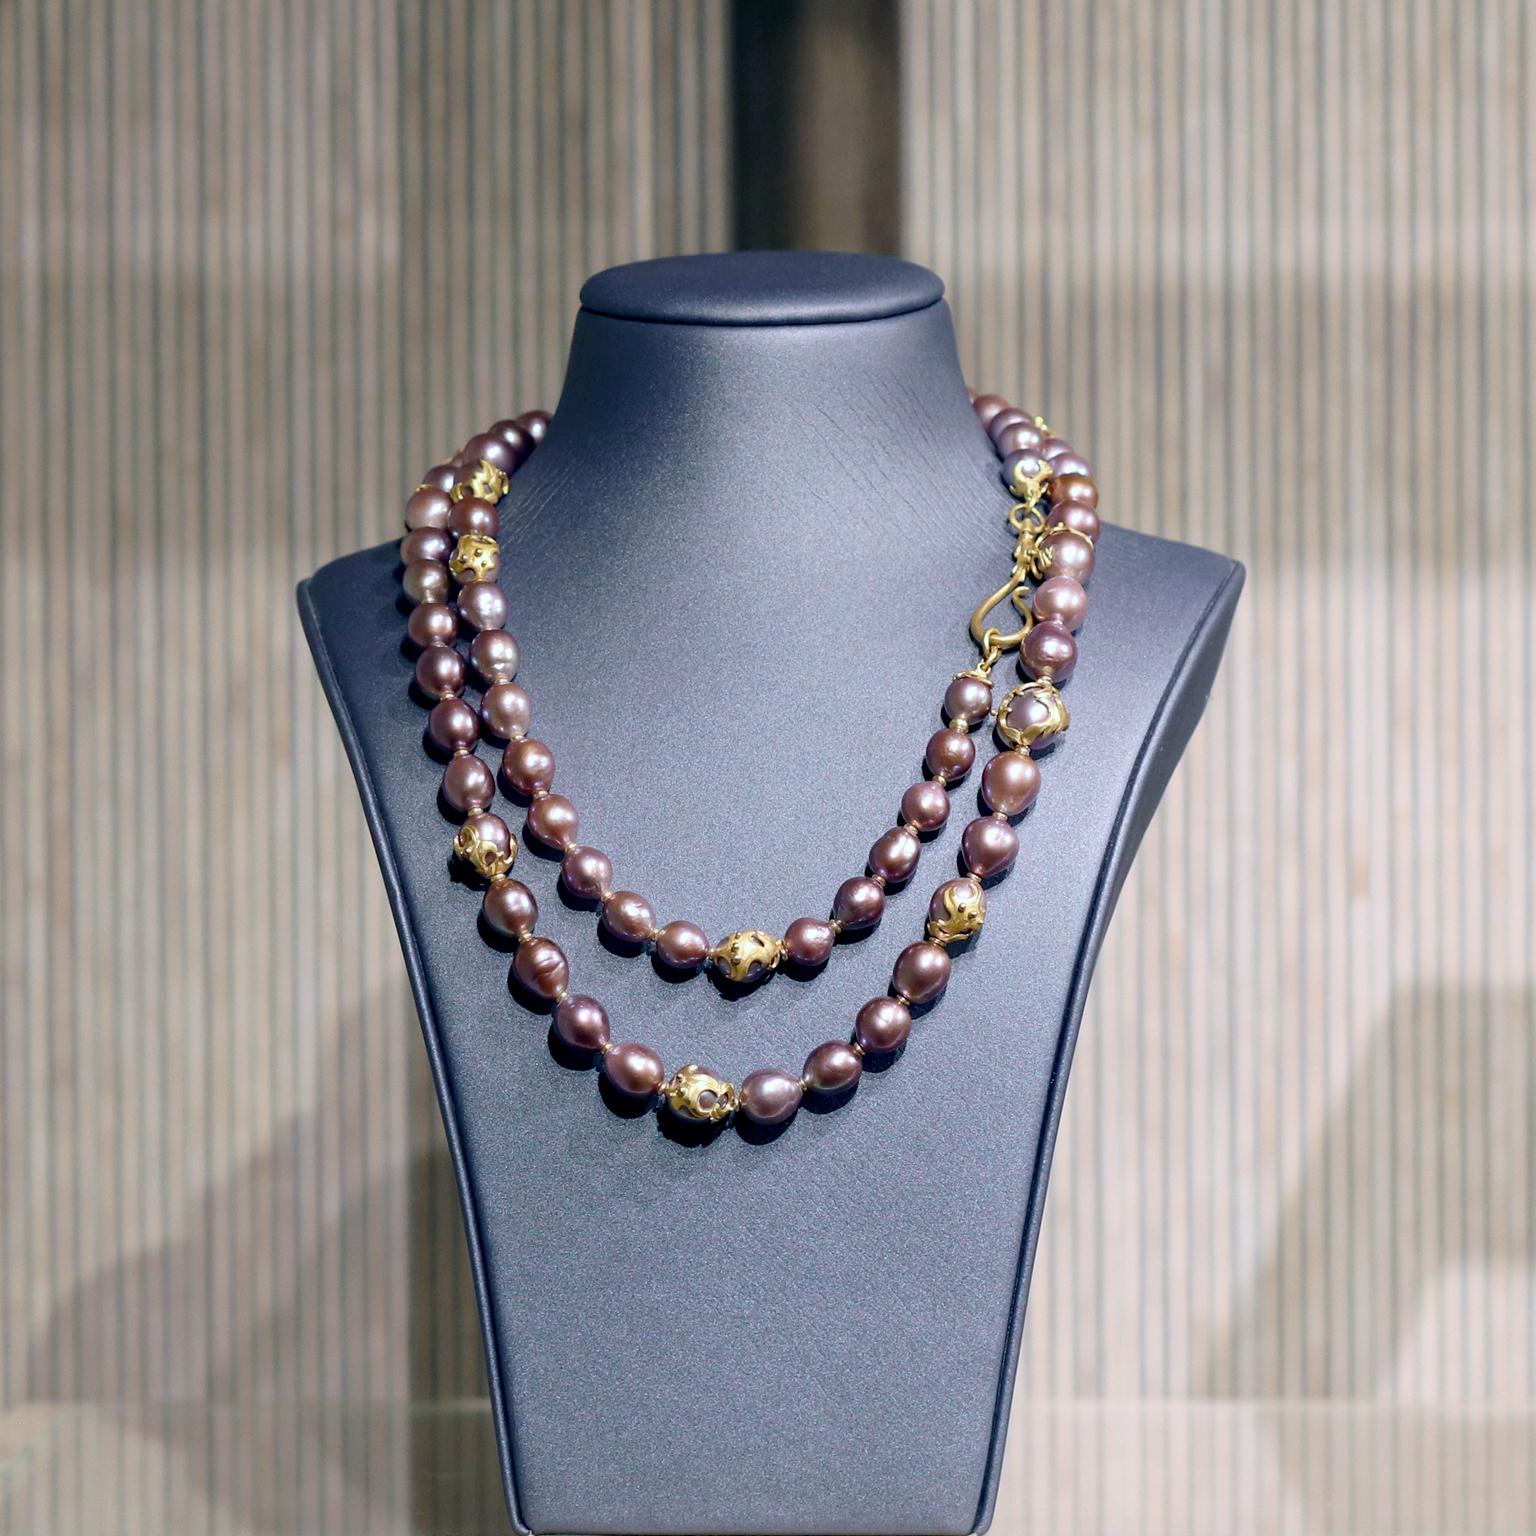 One of a Kind Opera Length Necklace hand-fabricated by acclaimed jewelry maker Lilly Fitzgerald showcasing a 40 inch long strand of natural, exceptional-quality Chinese Freshwater pearls with primary blue, violet, and pink tones complemented by